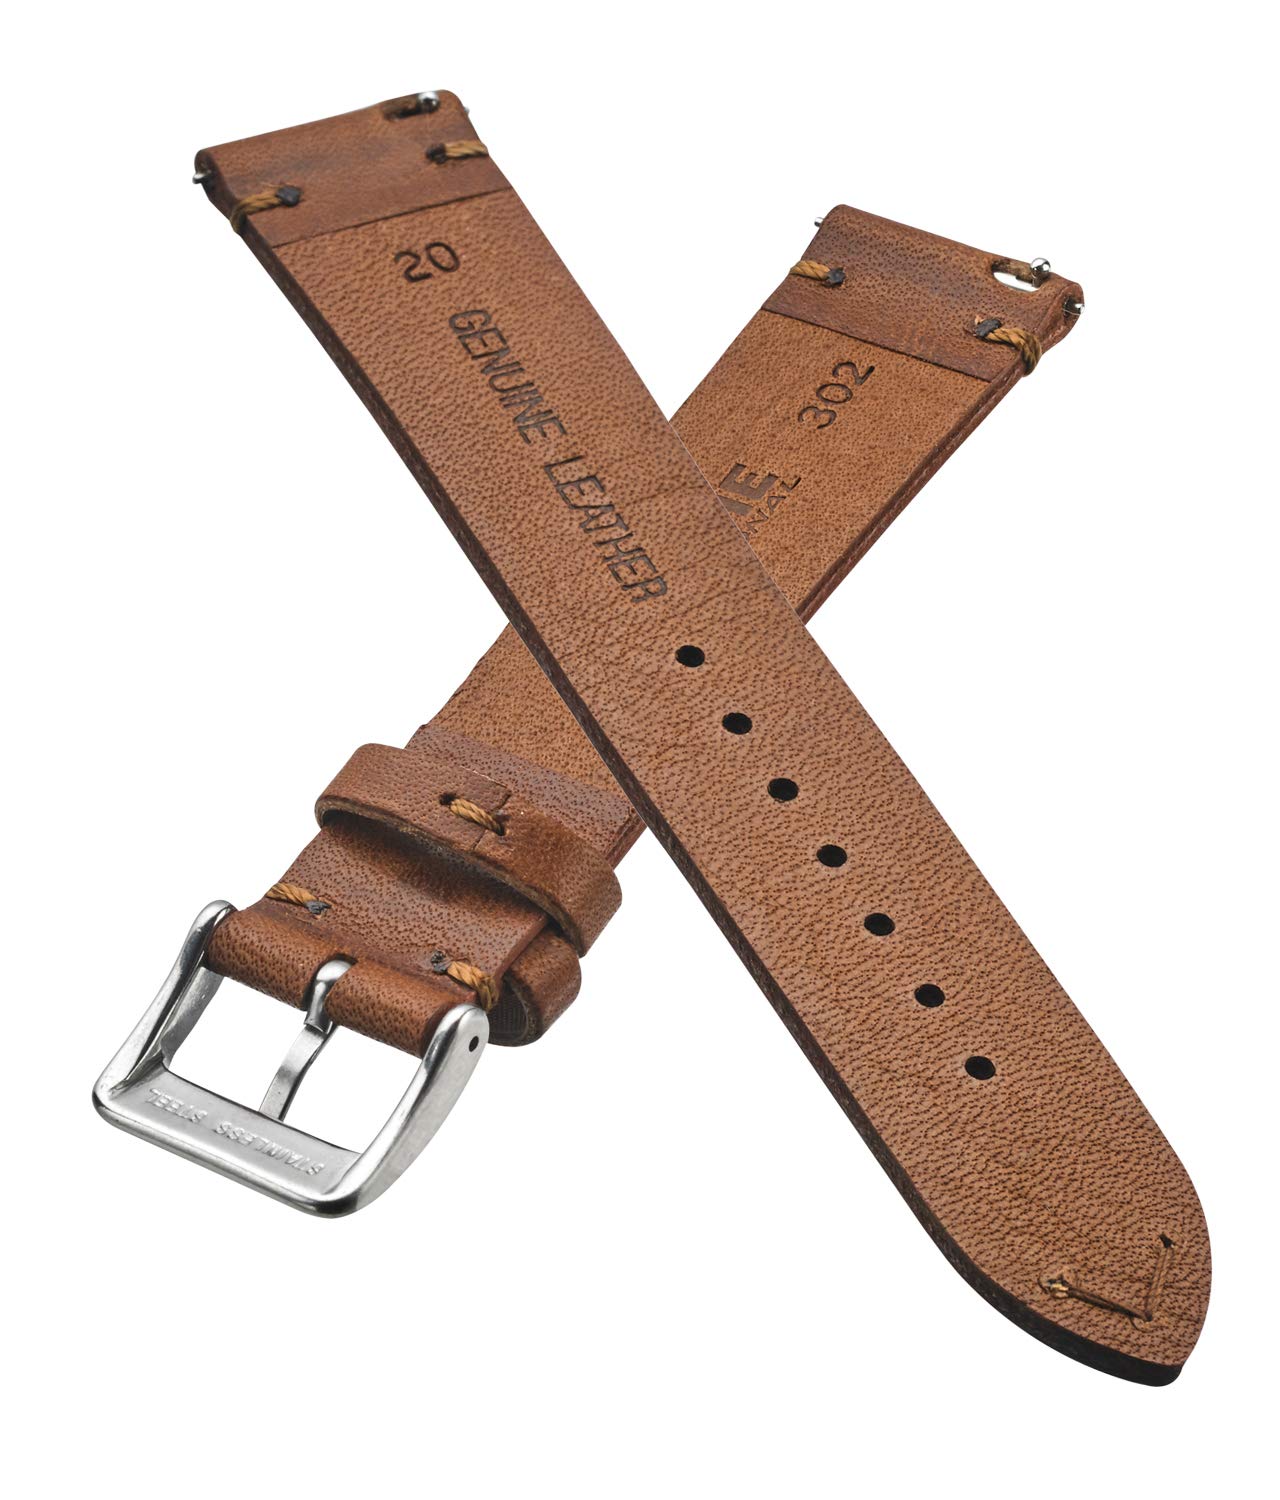 ALPINE Hand Made Genuine Vintage Leather Watch Strap with Quick Release Steel Spring Bars - Black, Brown, Grey, Blue and Tan in Sizes 18mm, 20mm, 22mm, 24mm (fits Wrist Size 6 1/4 inch to 8 inch)